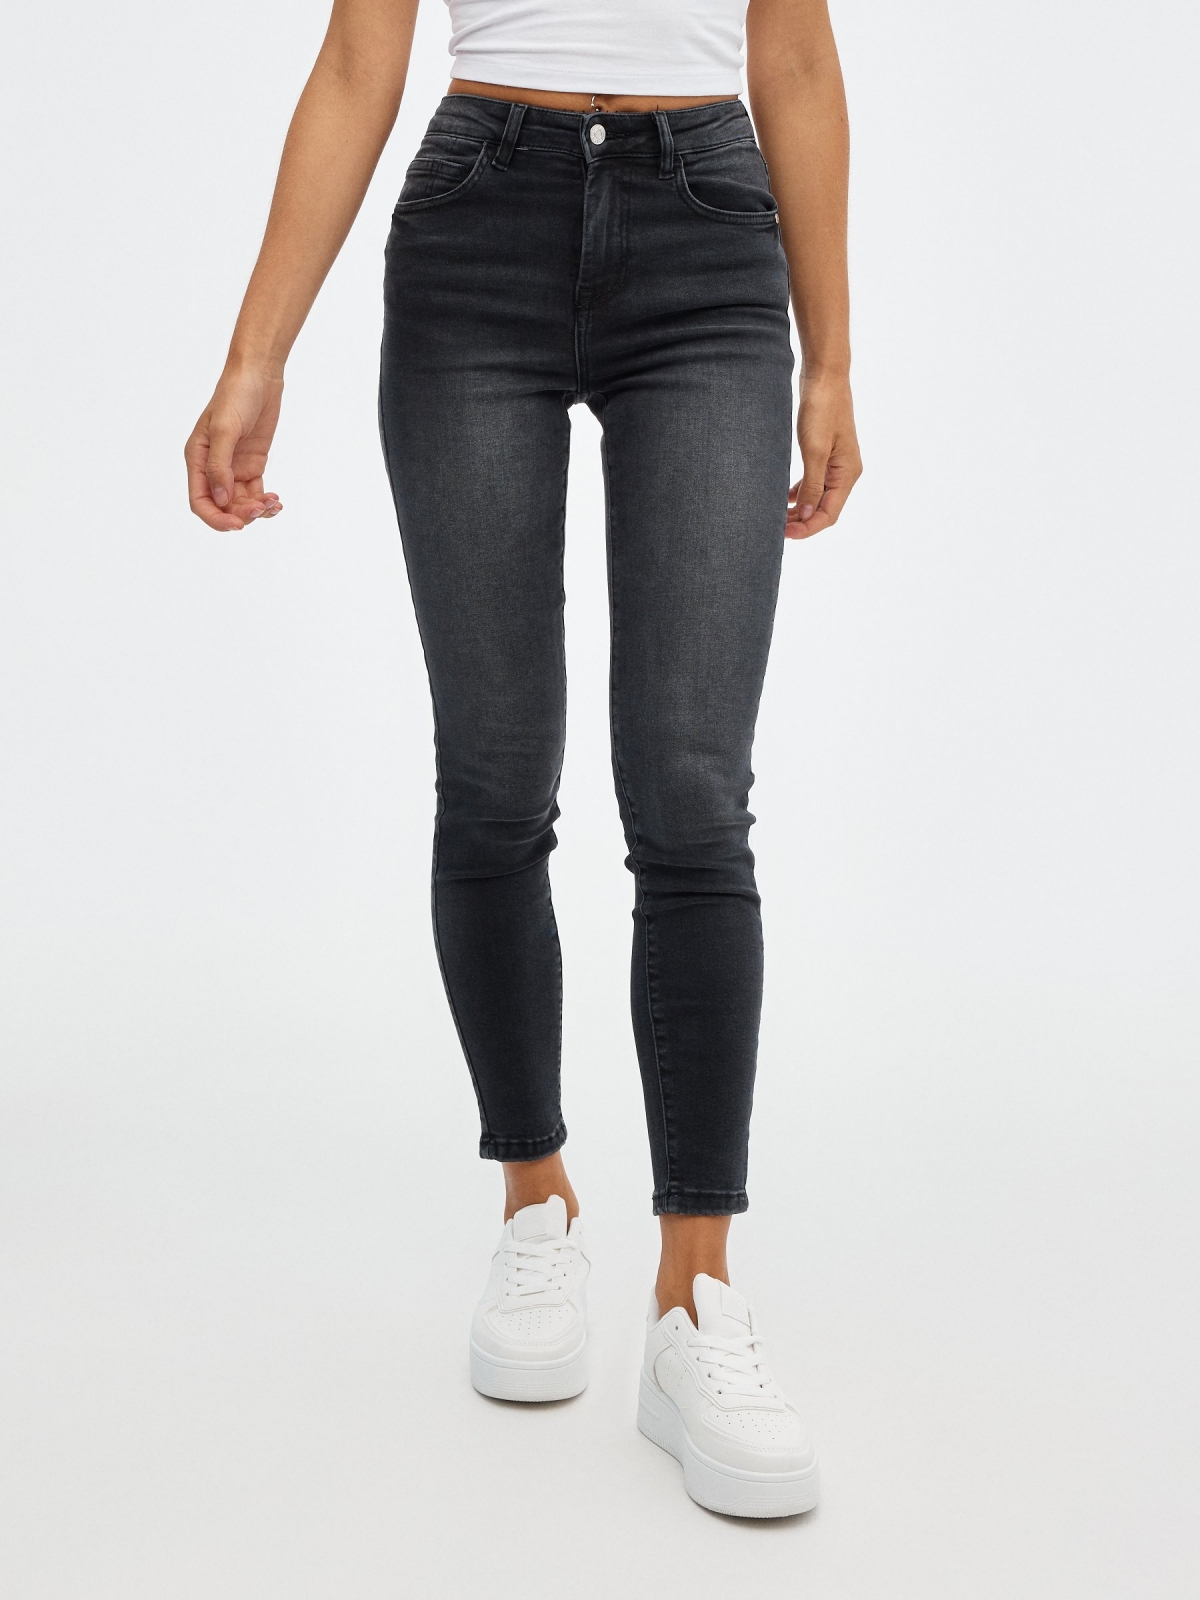 Jenas basic skinny mid-rise black middle front view